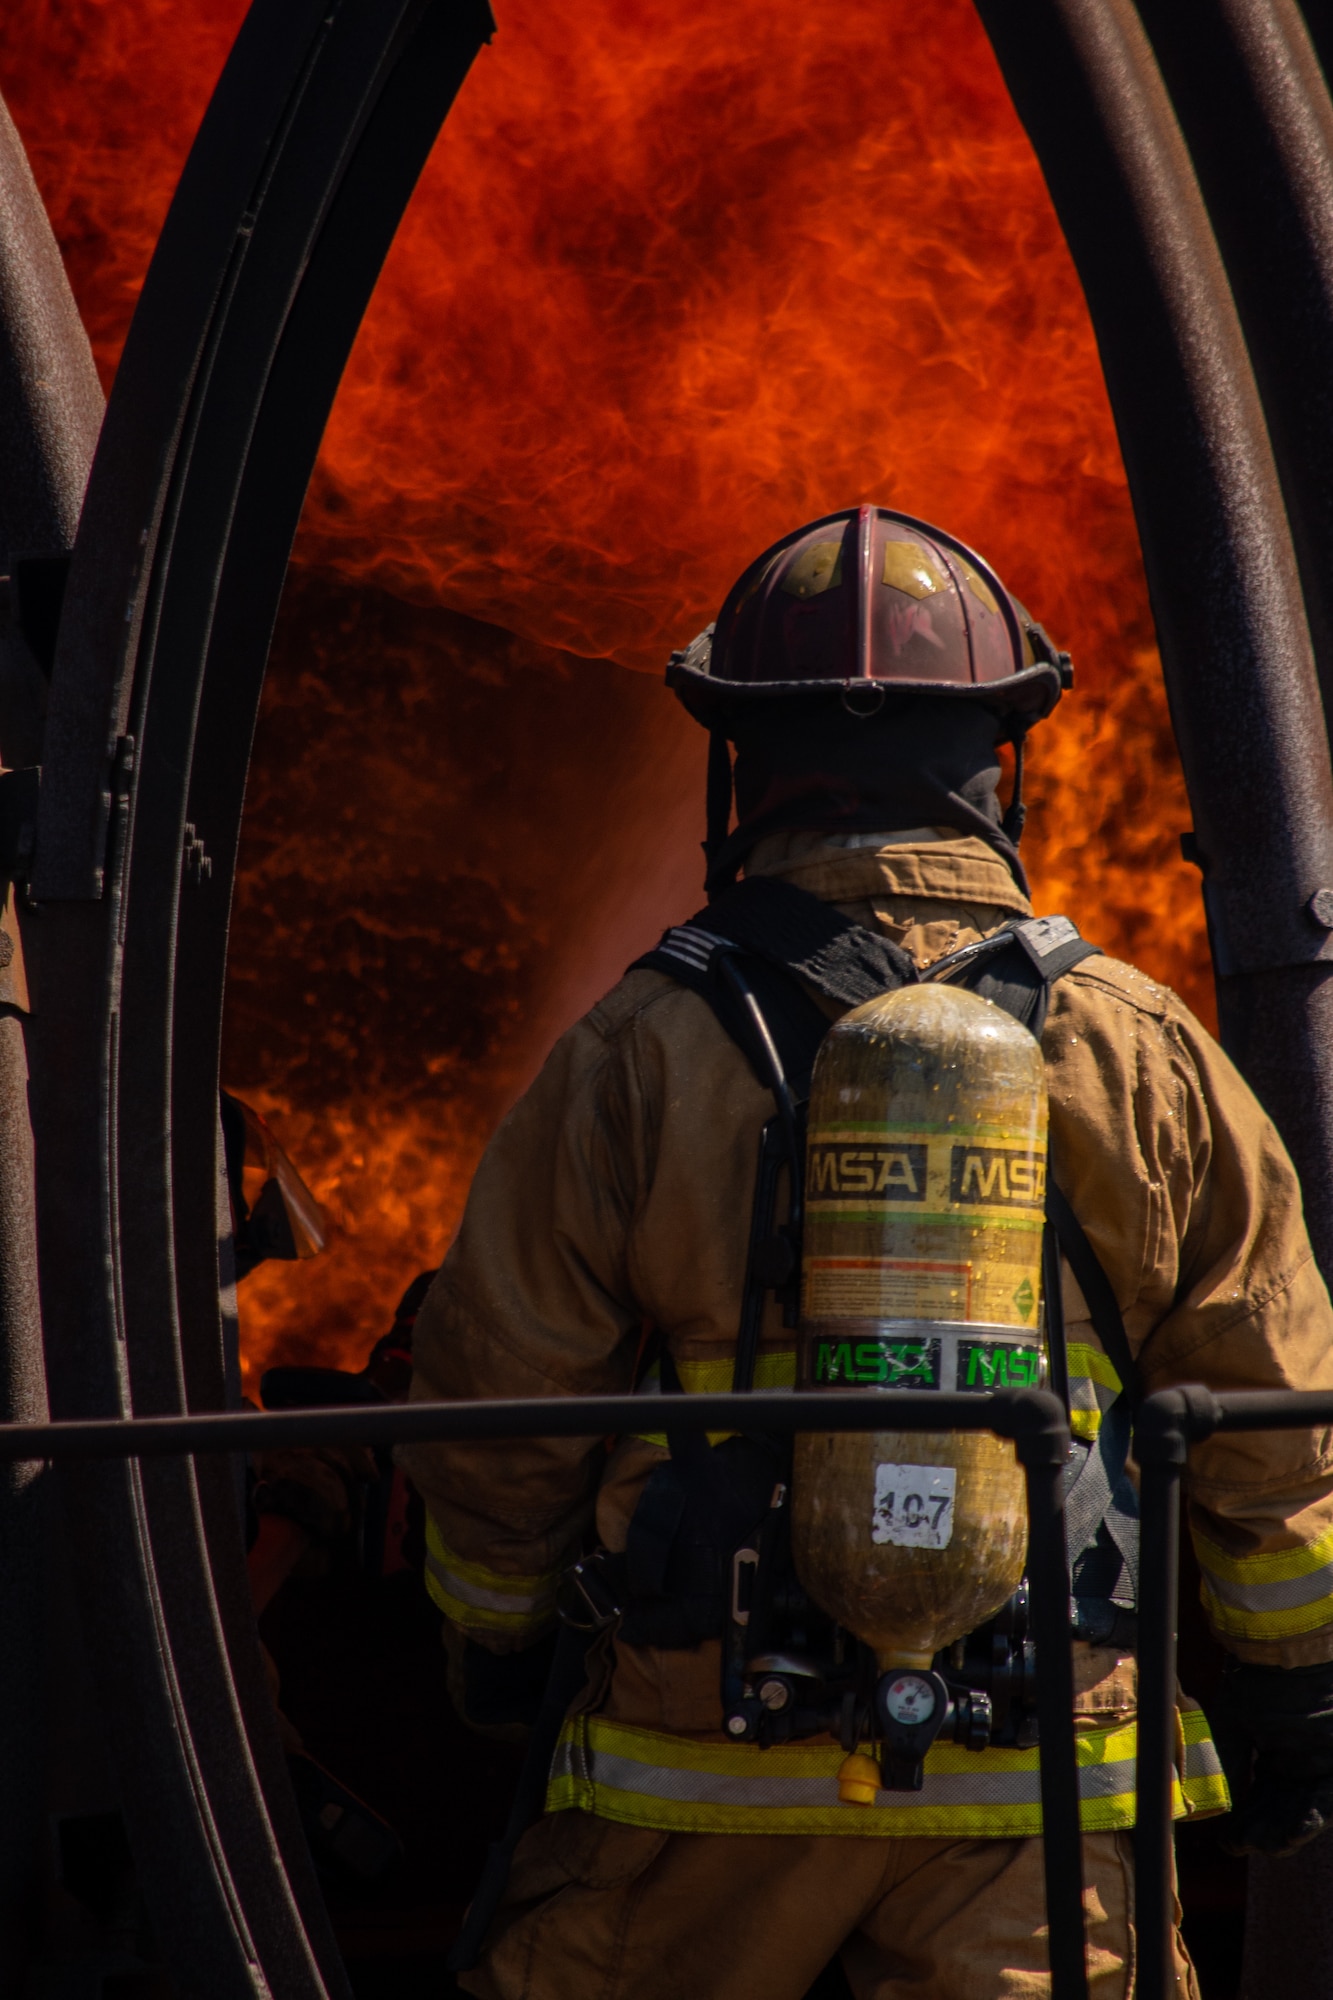 A U.S. Air Force firefighter enters an aircraft fire trainer during an exercise at Dover Air Force Base, Delaware, Sept. 22, 2020. Temperatures inside the aircraft fire trainer can reach up to 1,500 degrees Fahrenheit. (U.S. Air Force photo by Airman Brandan Hollis)